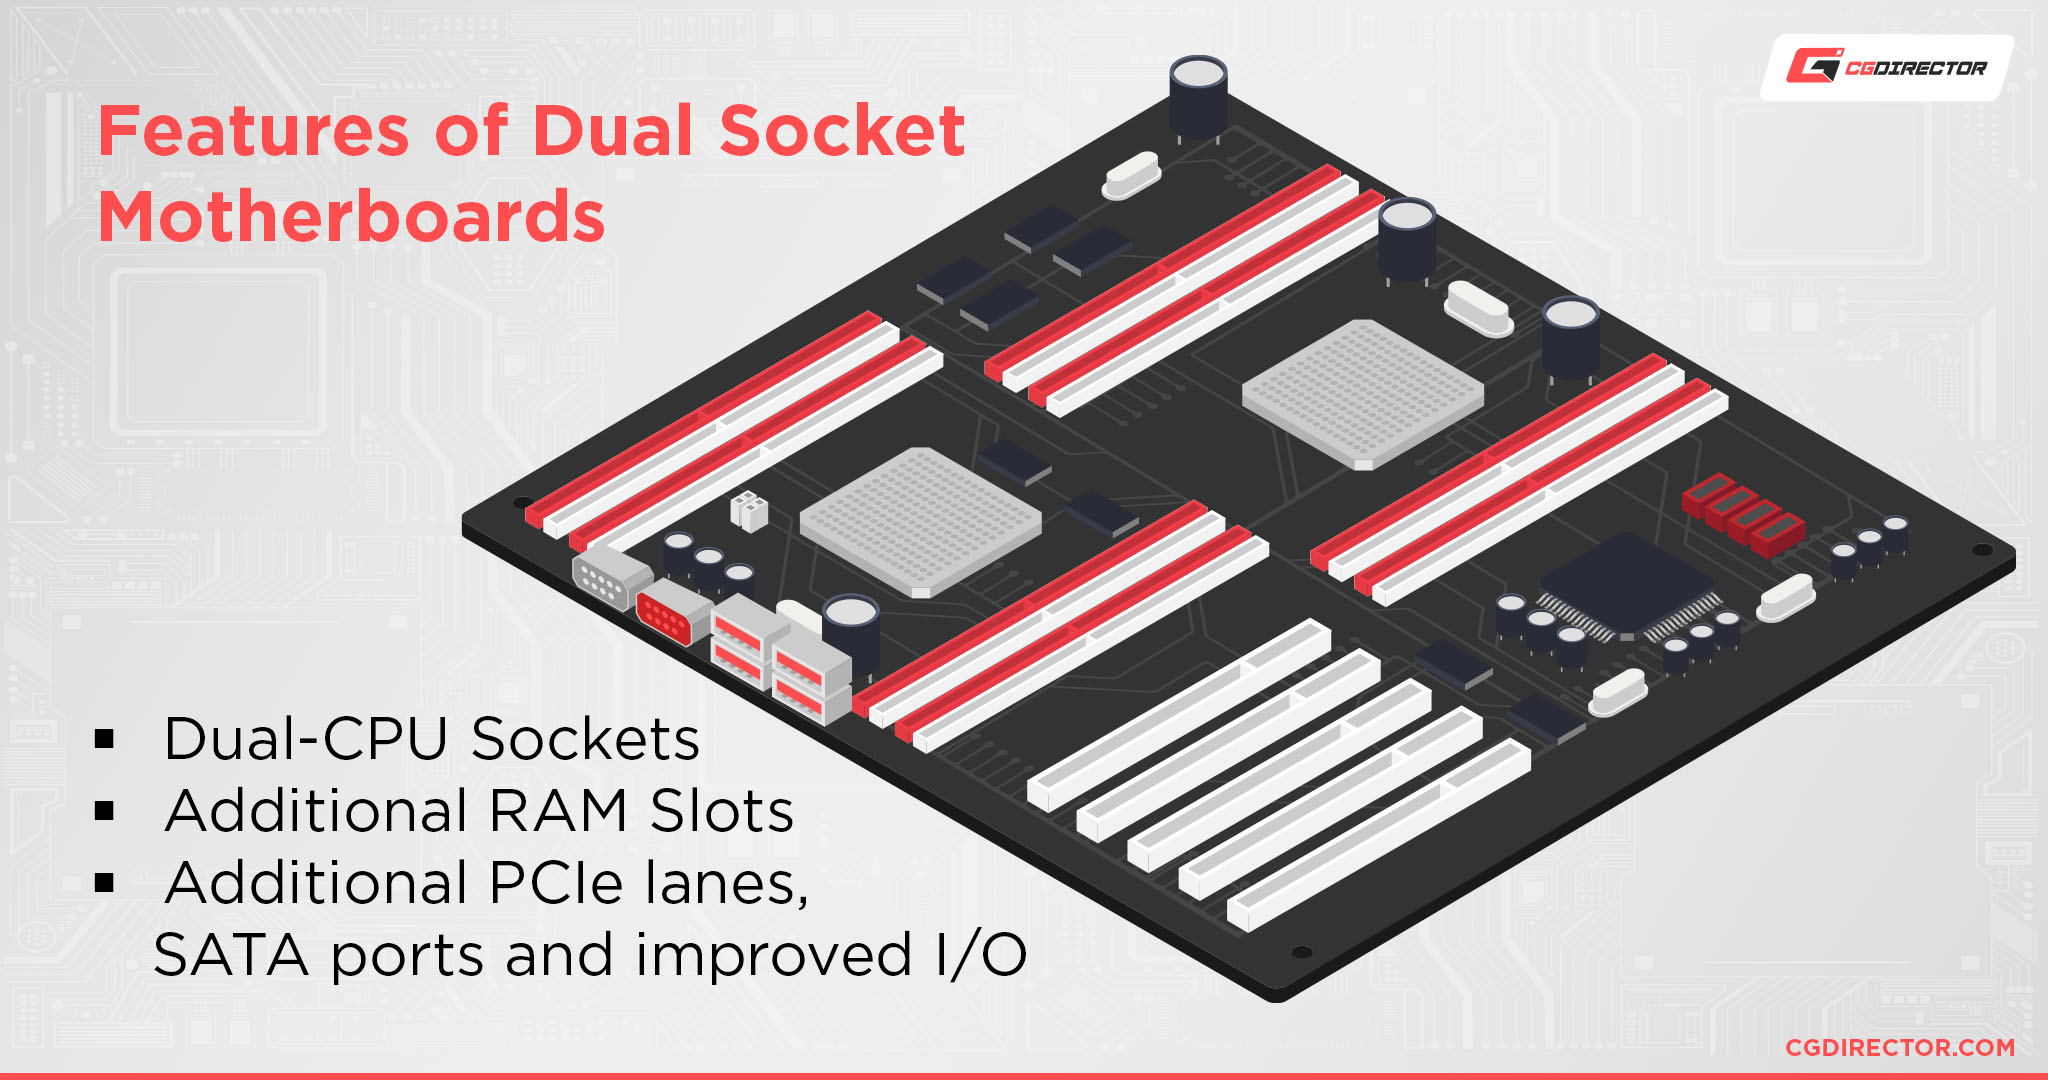 Features of Dual Socket